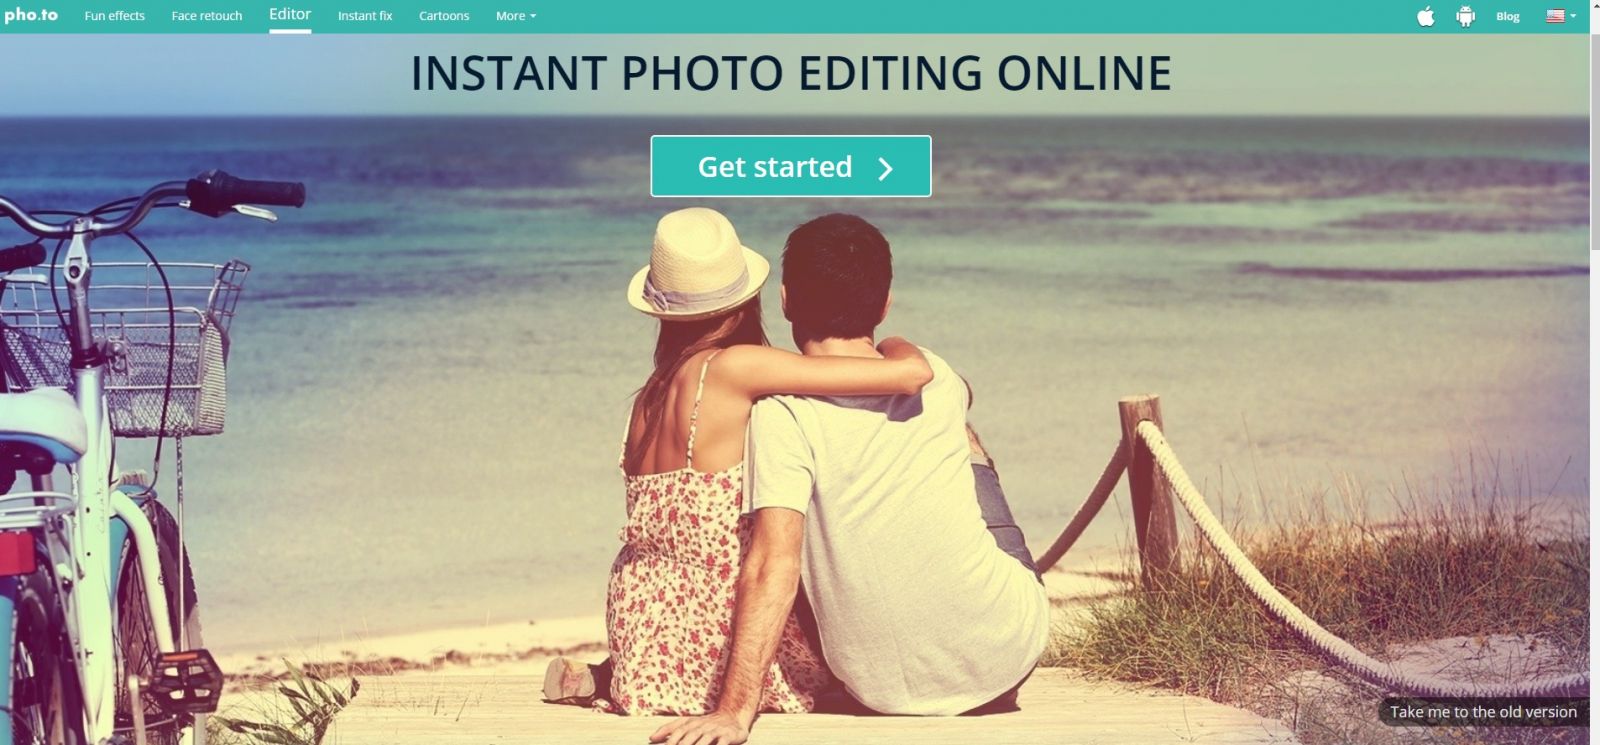 Instant Photo Editing Online